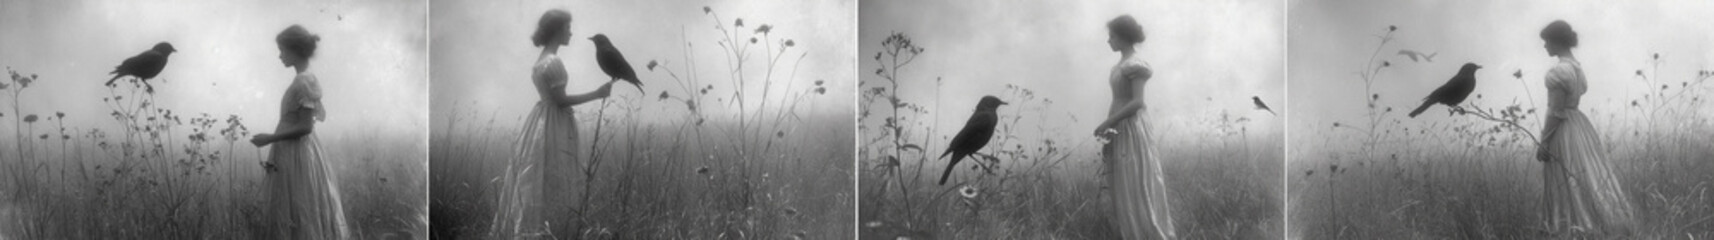 Black and white surreal photo of a girl in a meadow. The bird sits on the girl's outstretched arm. Adding an element of wonder. The contrast between black and white enhances the dreamlike quality